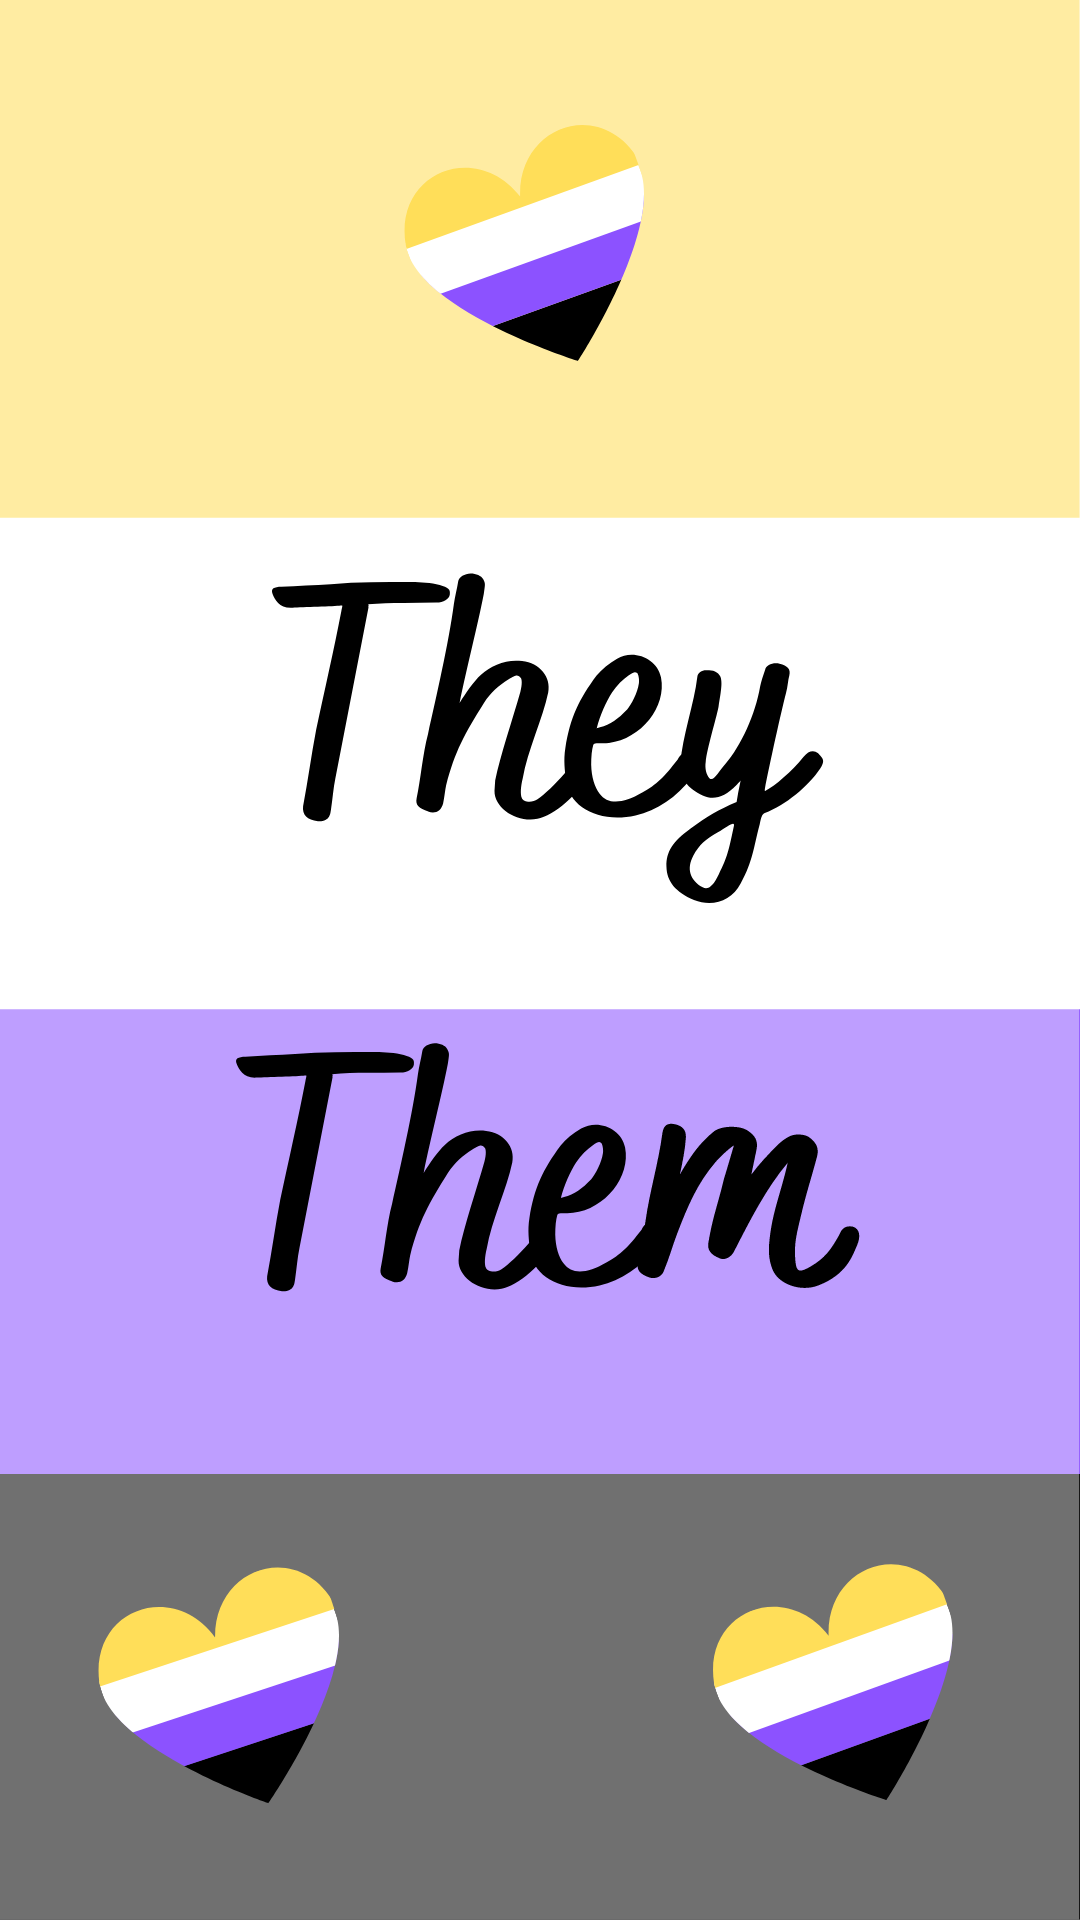 Cute Phone Wallpaper I've Made For Friends And Self. Pansexual, Transgender, Genderfluid And Non Binary. Help Yourselves. Xo: Lgbt